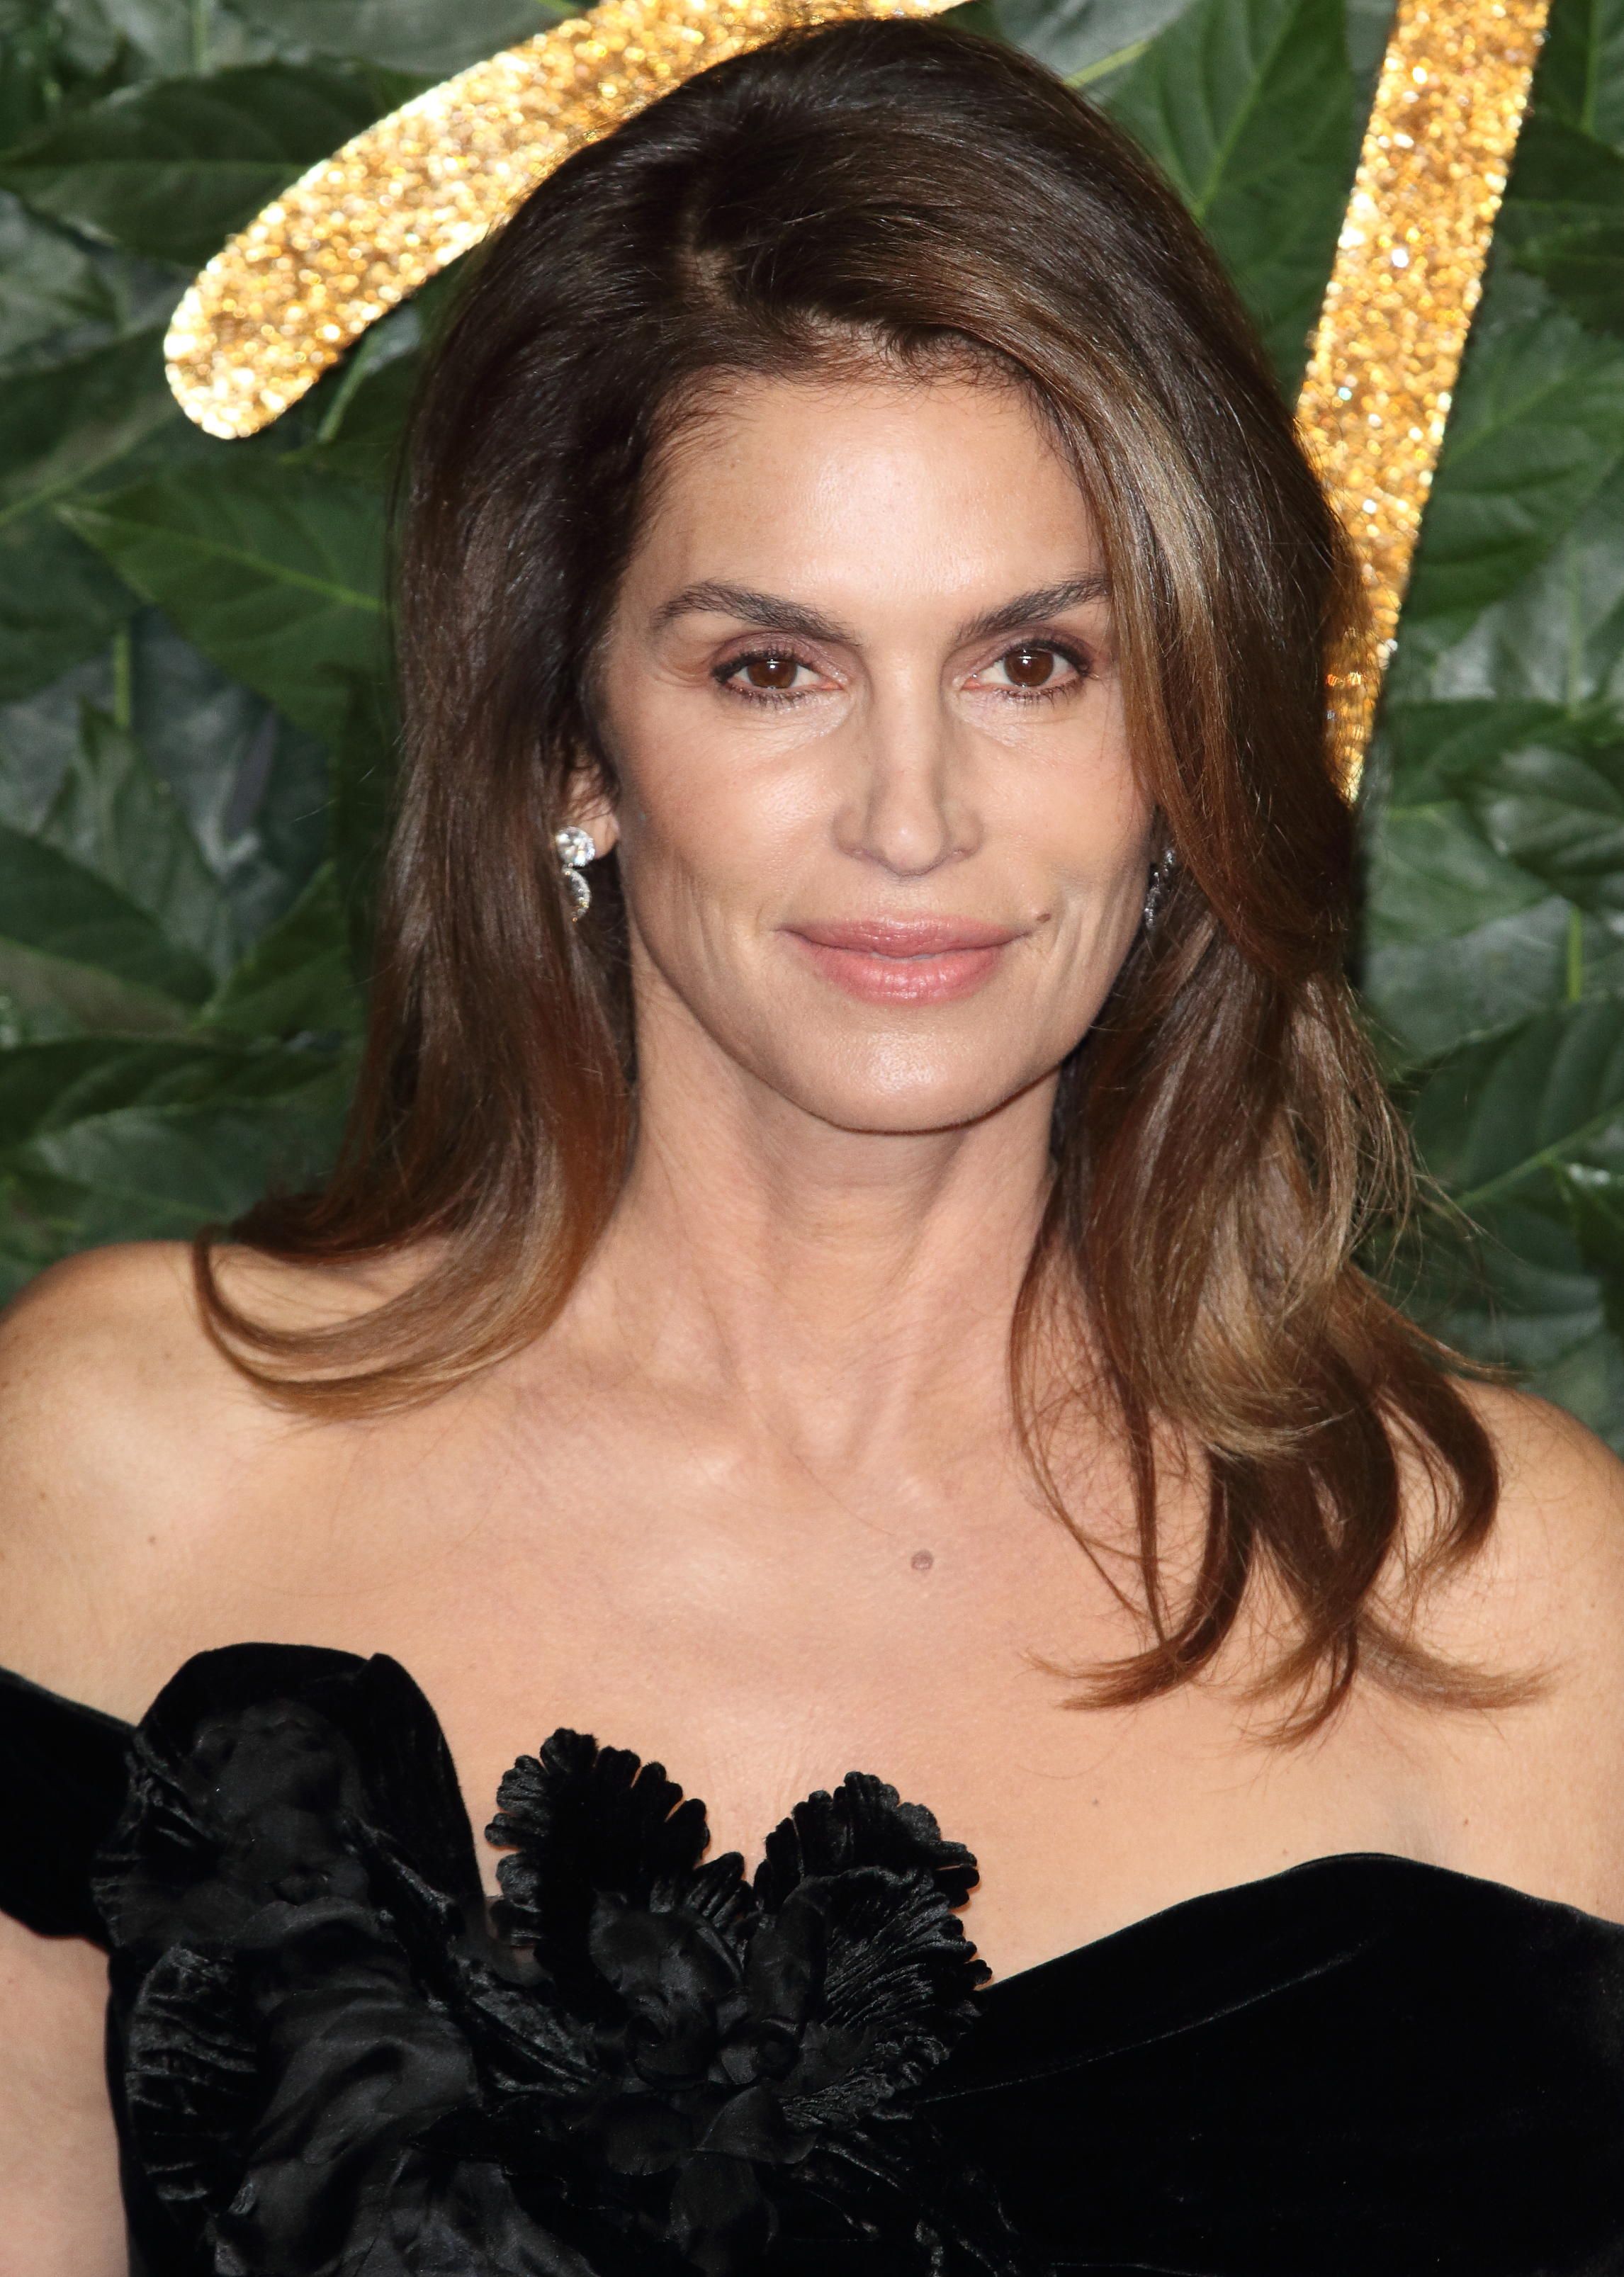 Cindy Crawford seen on the red carpet during the Fashion Awards 2018 at the Royal Albert Hall, Kensington in London